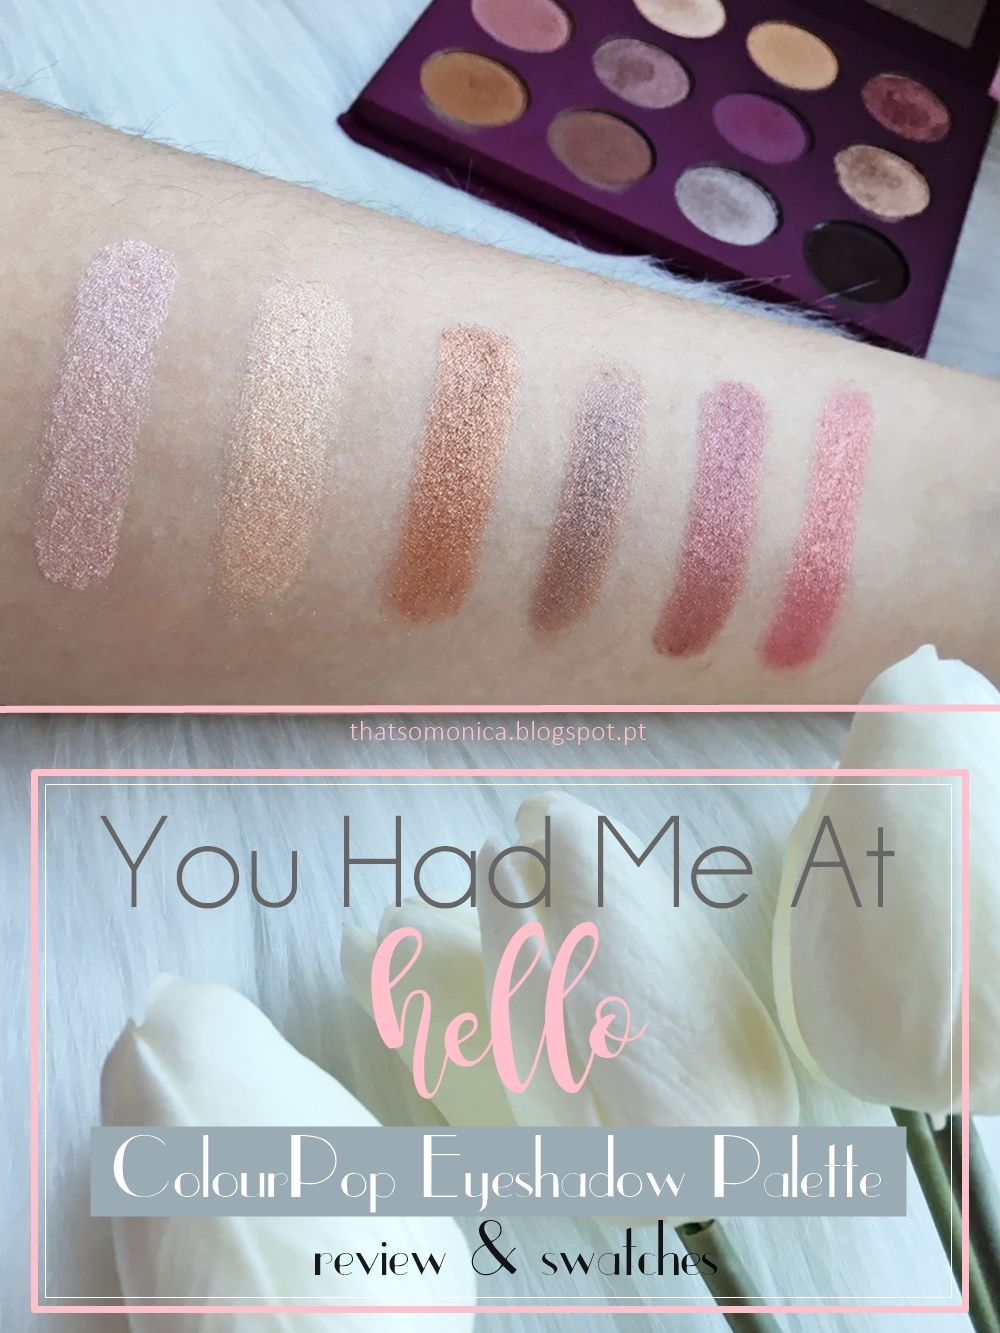 Colourpop S You Had Me At Hello Palette Review Swatches